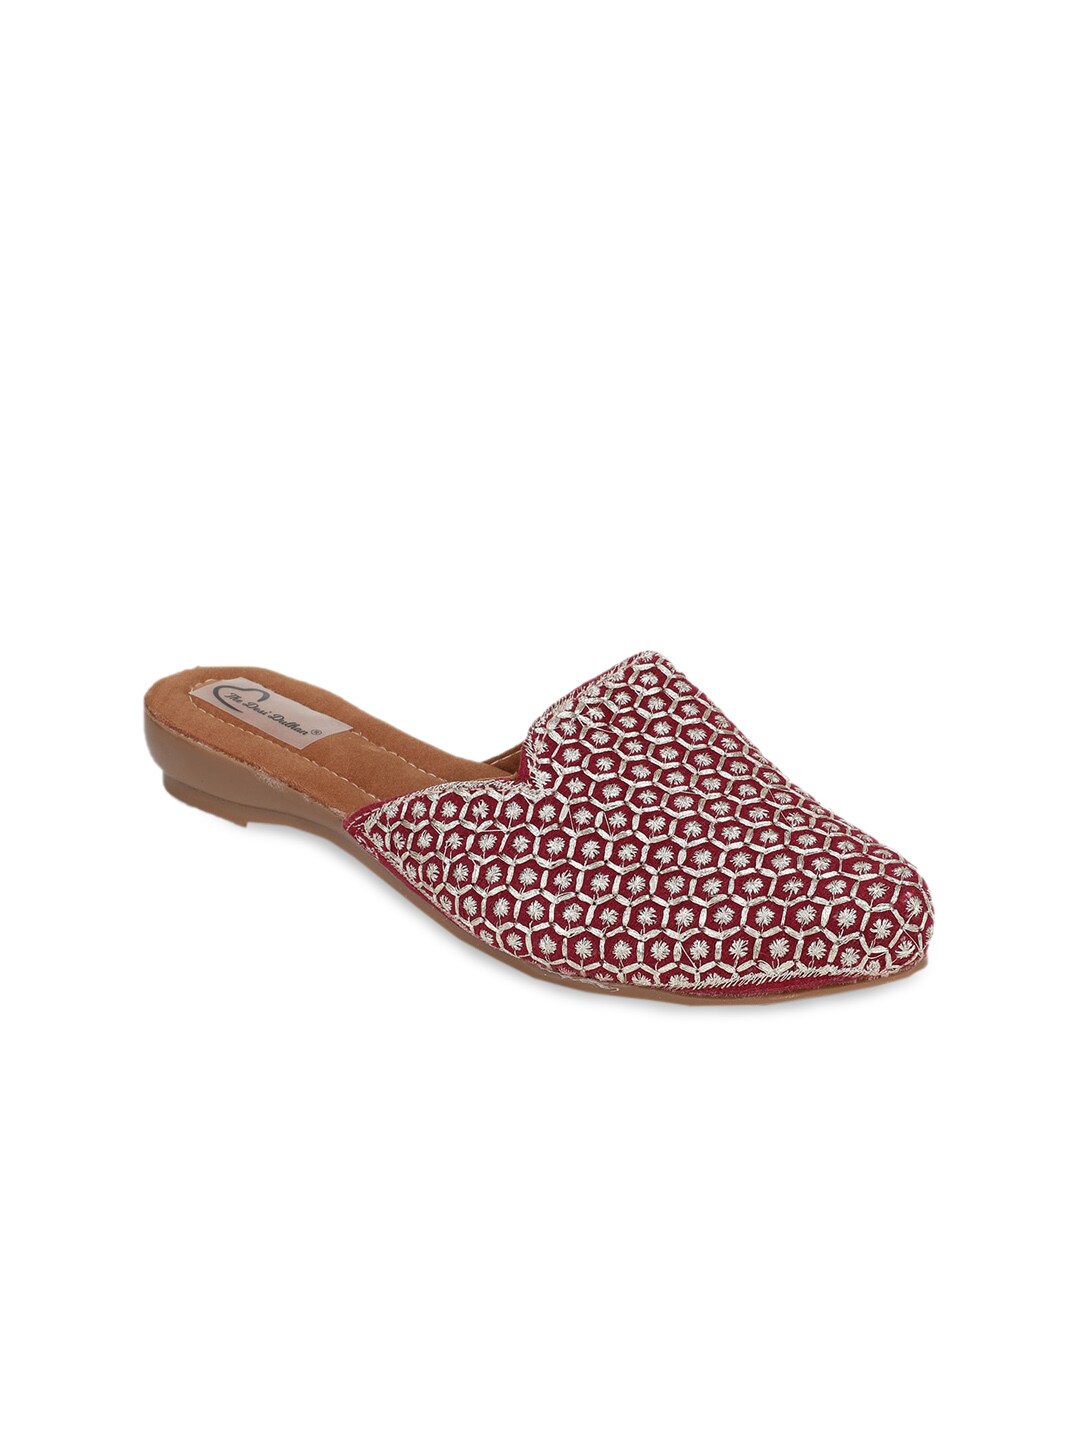 The Desi Dulhan Women Red Embellished Leather Ethnic Flats Price in India